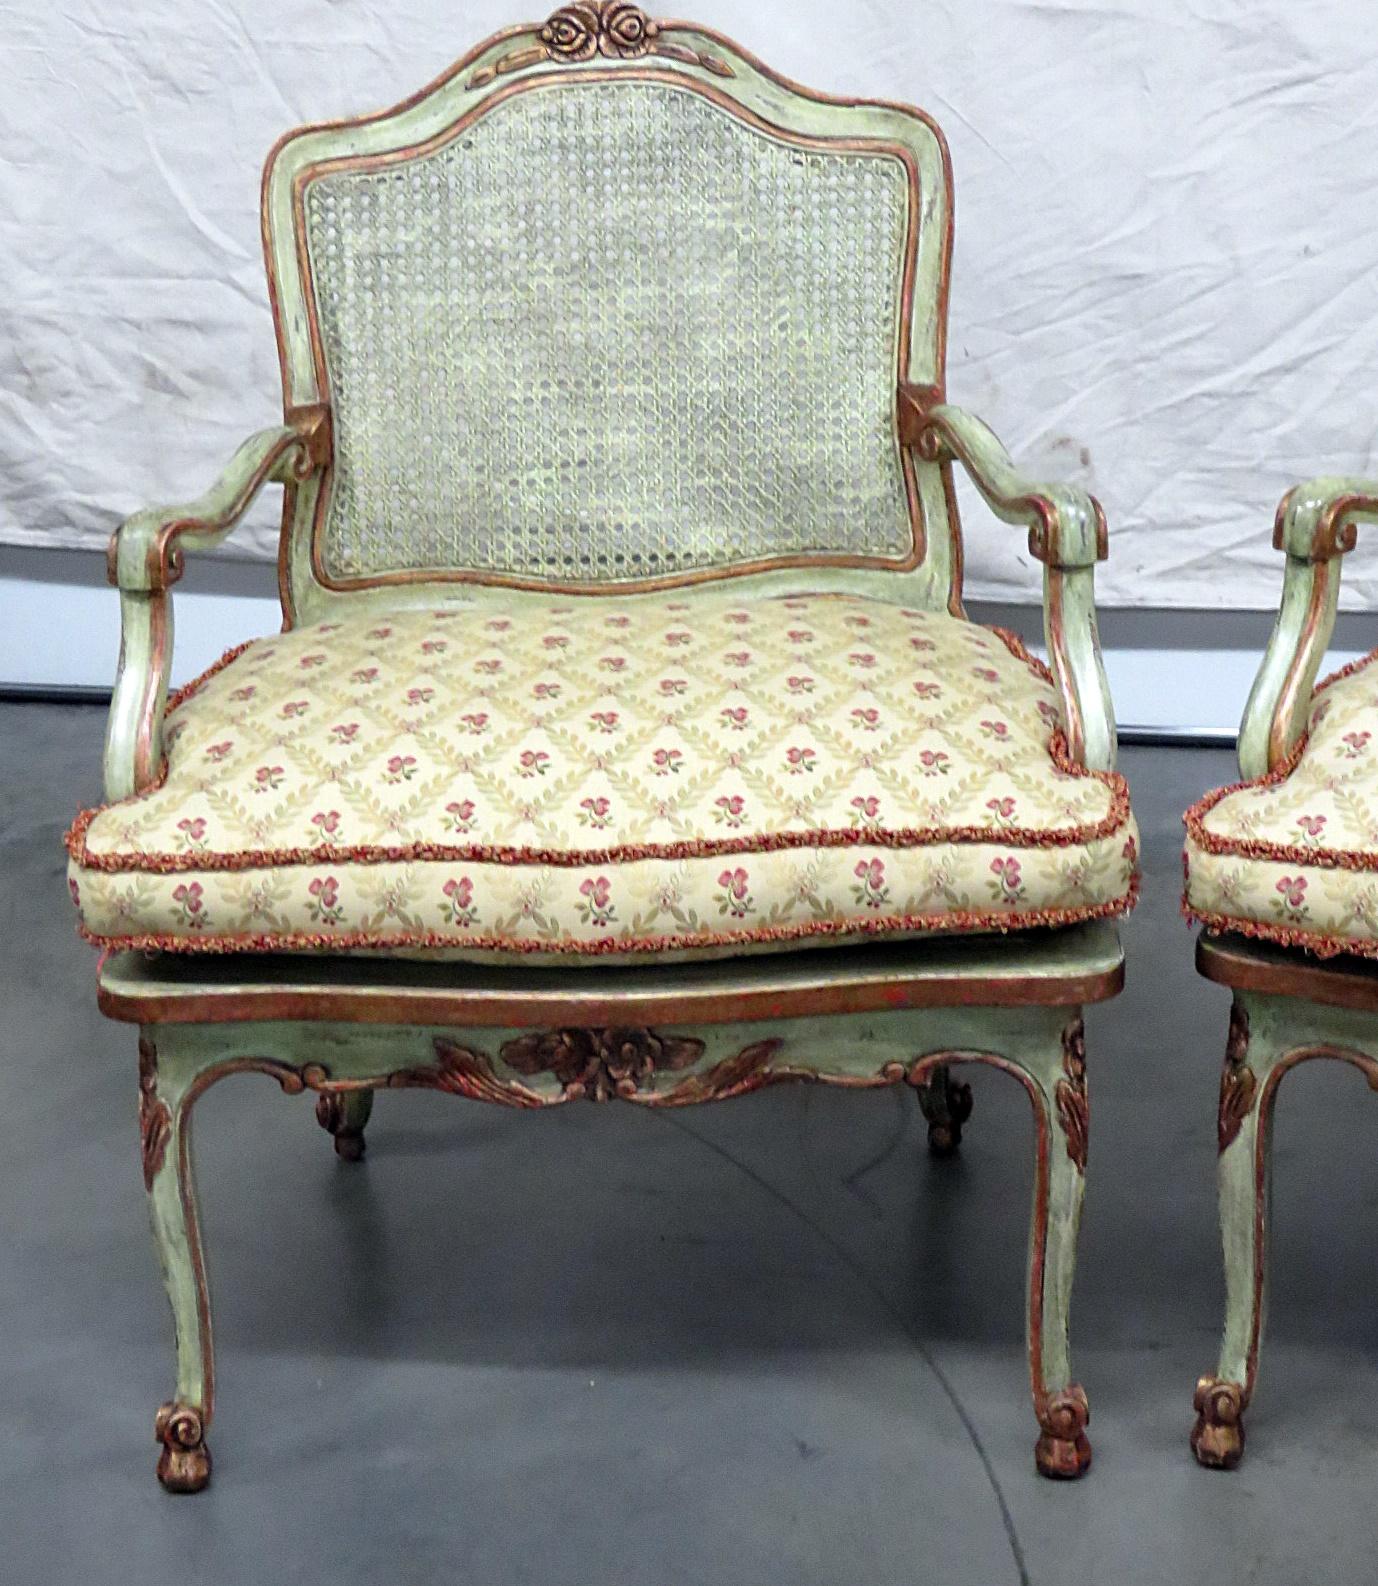 Pair of Louis XV style distressed painted armchairs with caned seats and backs with removable cushions.